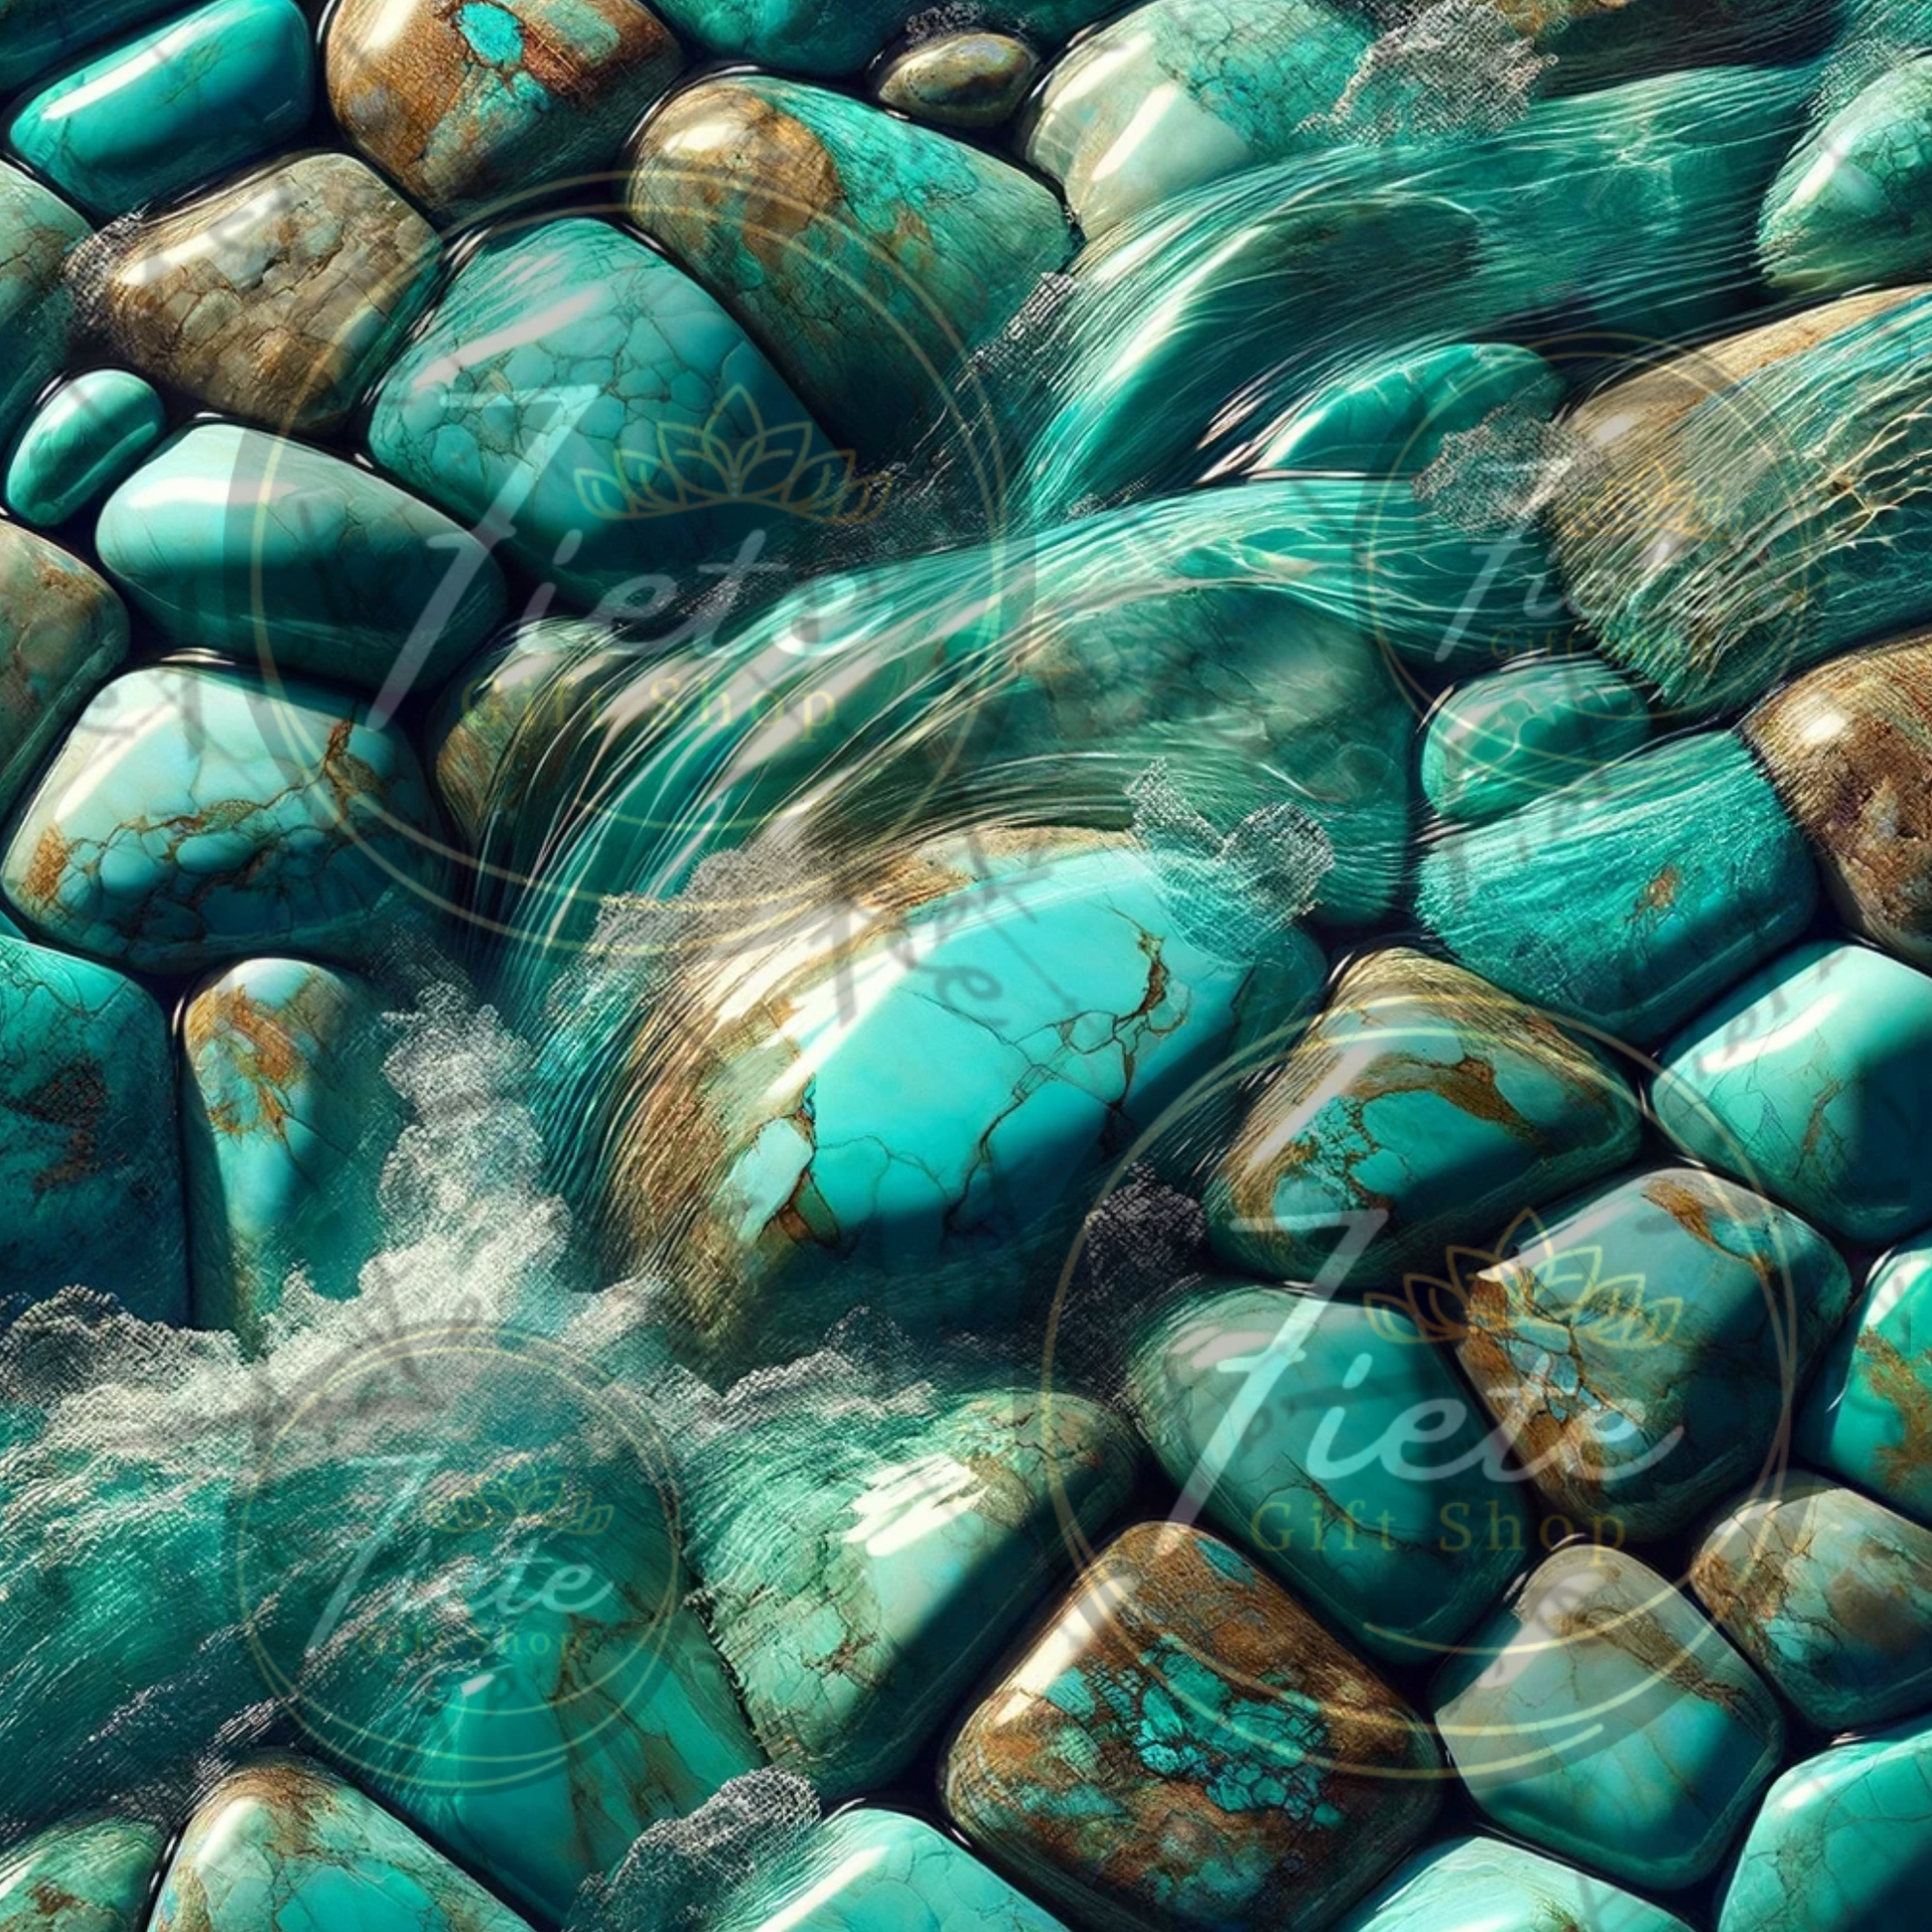 A square filled with an intricate pattern that resembles antique turquoise stones. Water flowing over top of the stones.